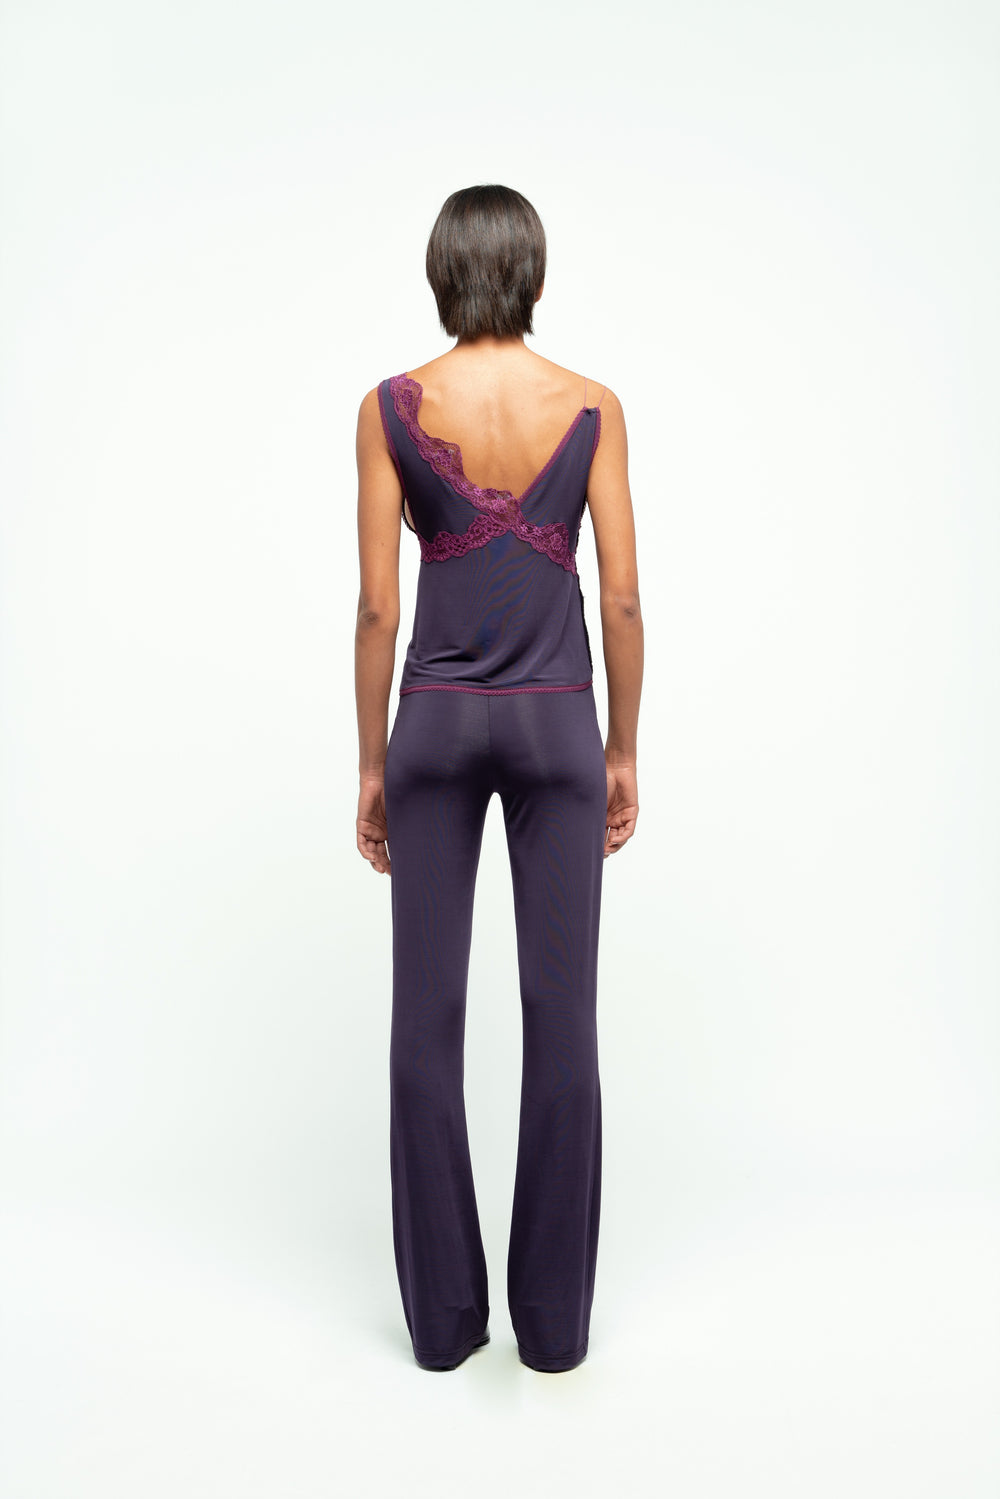 LEGGING WITH LACE DETAIL AMETHYST